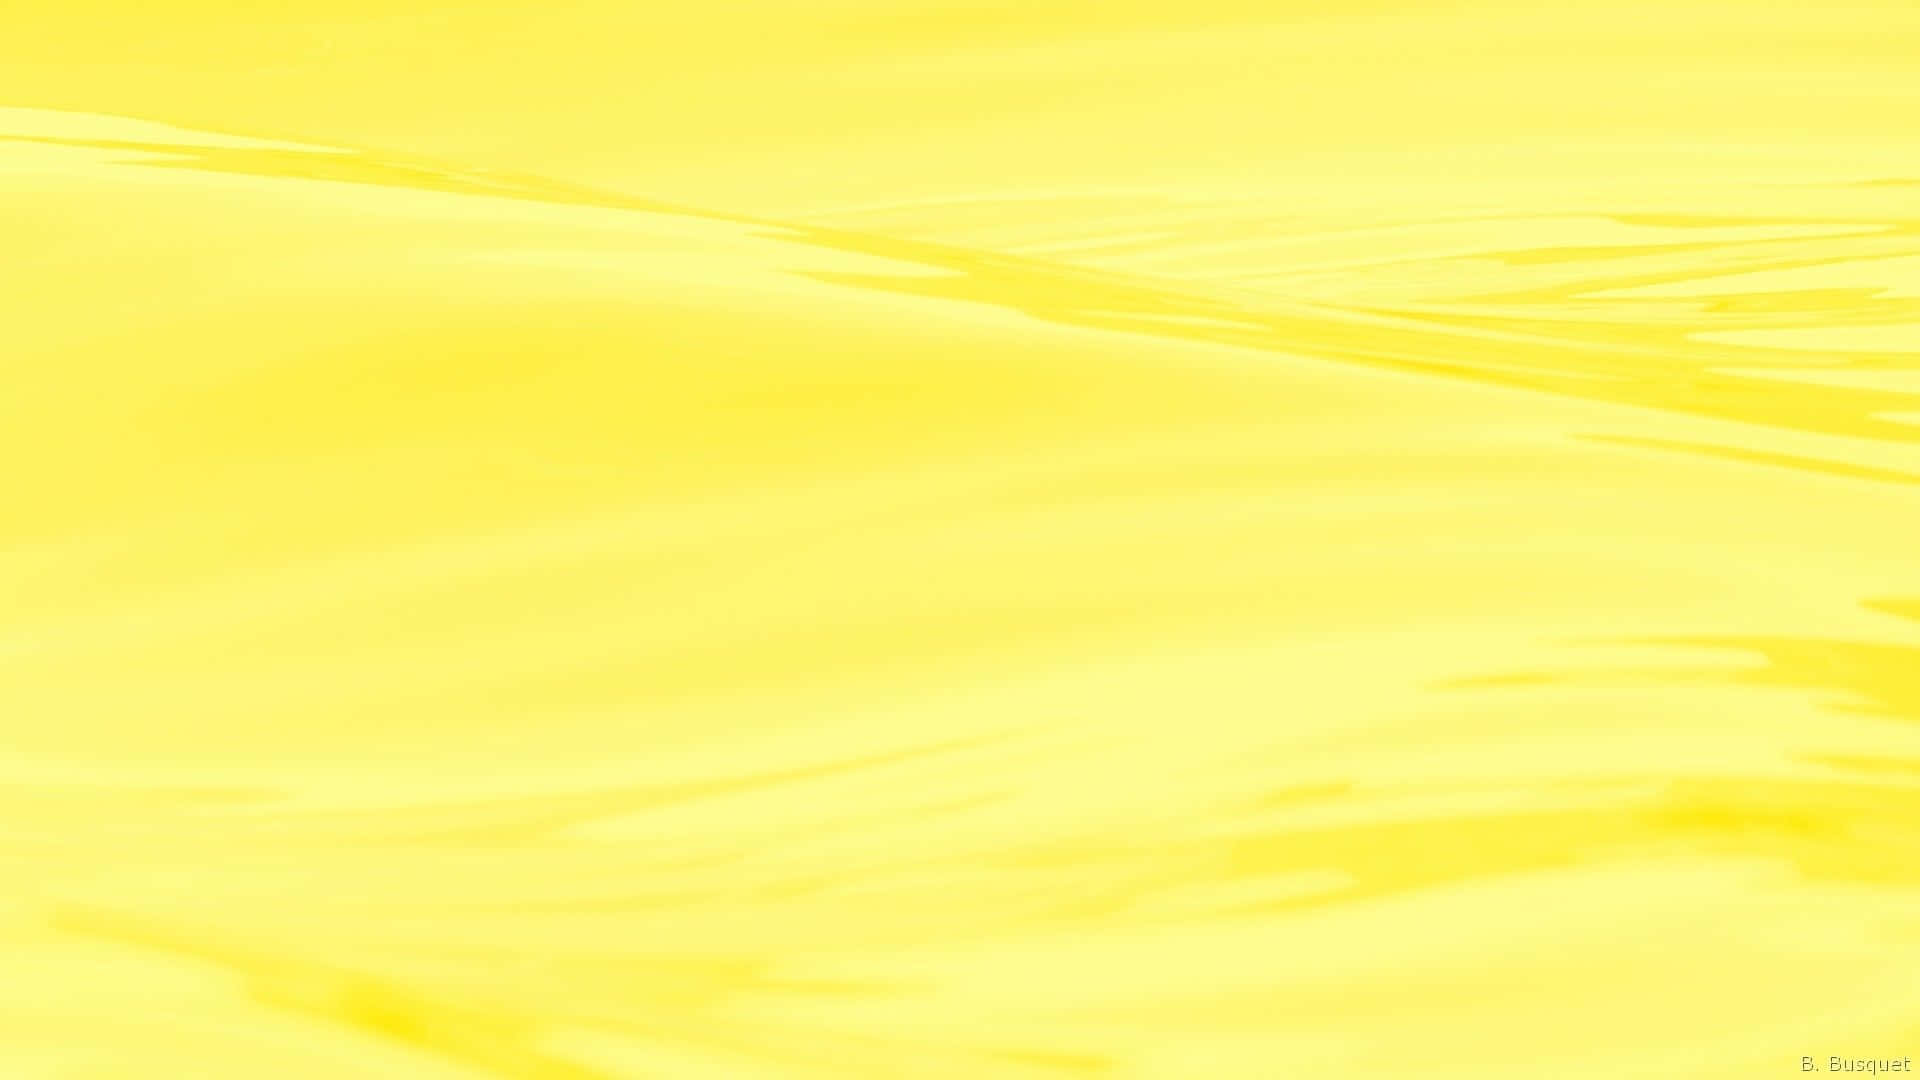 Image  Bright and Bold Light Yellow Background